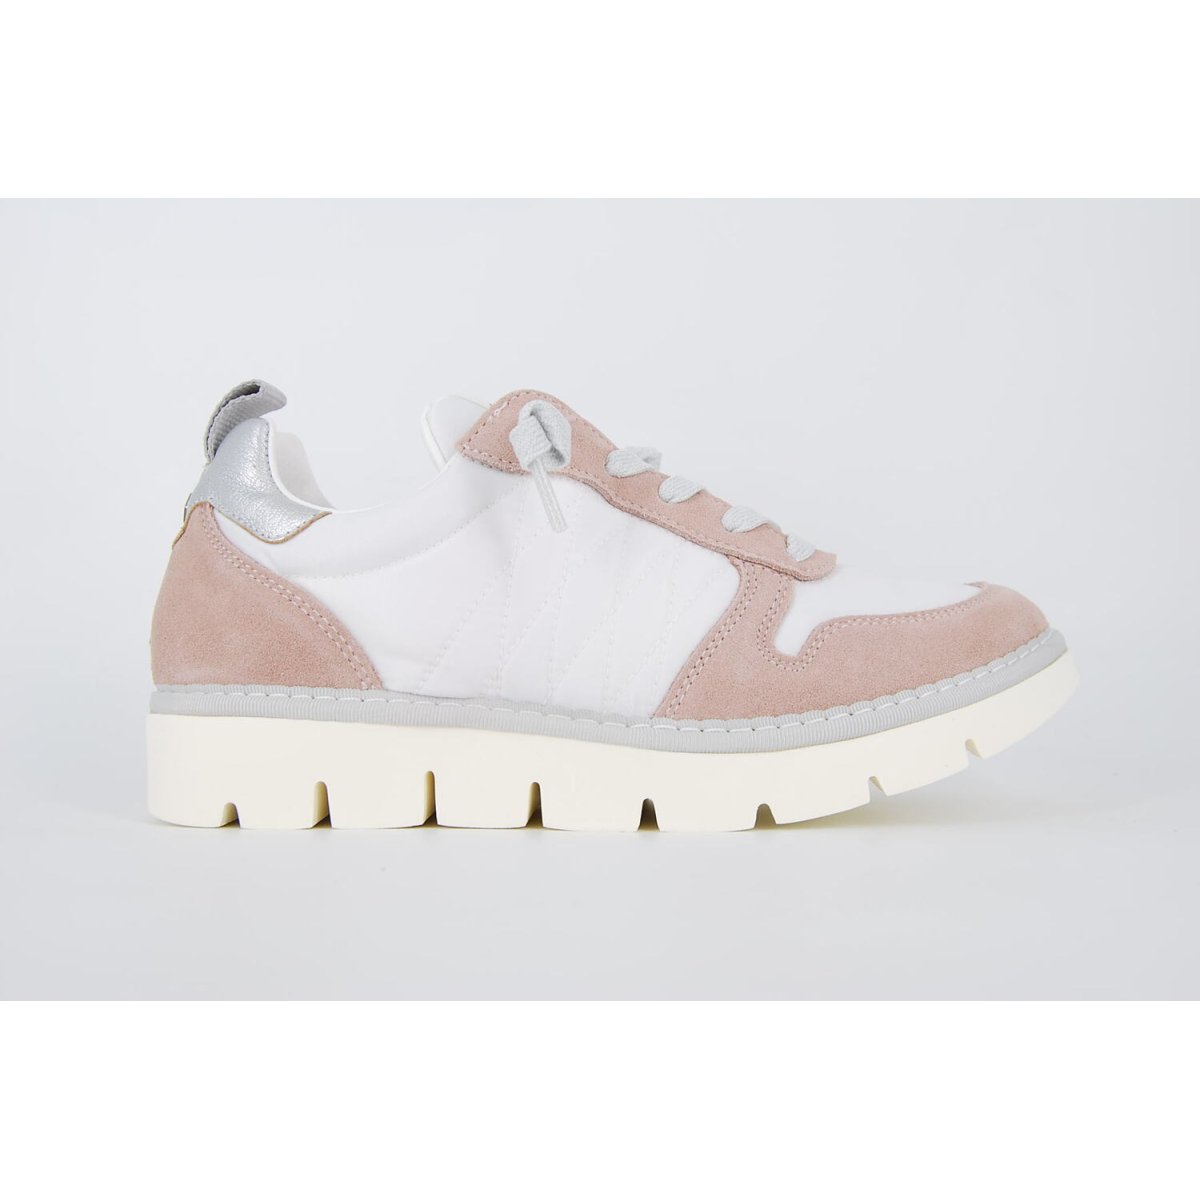 Panchic P05 - Sneakers Donna